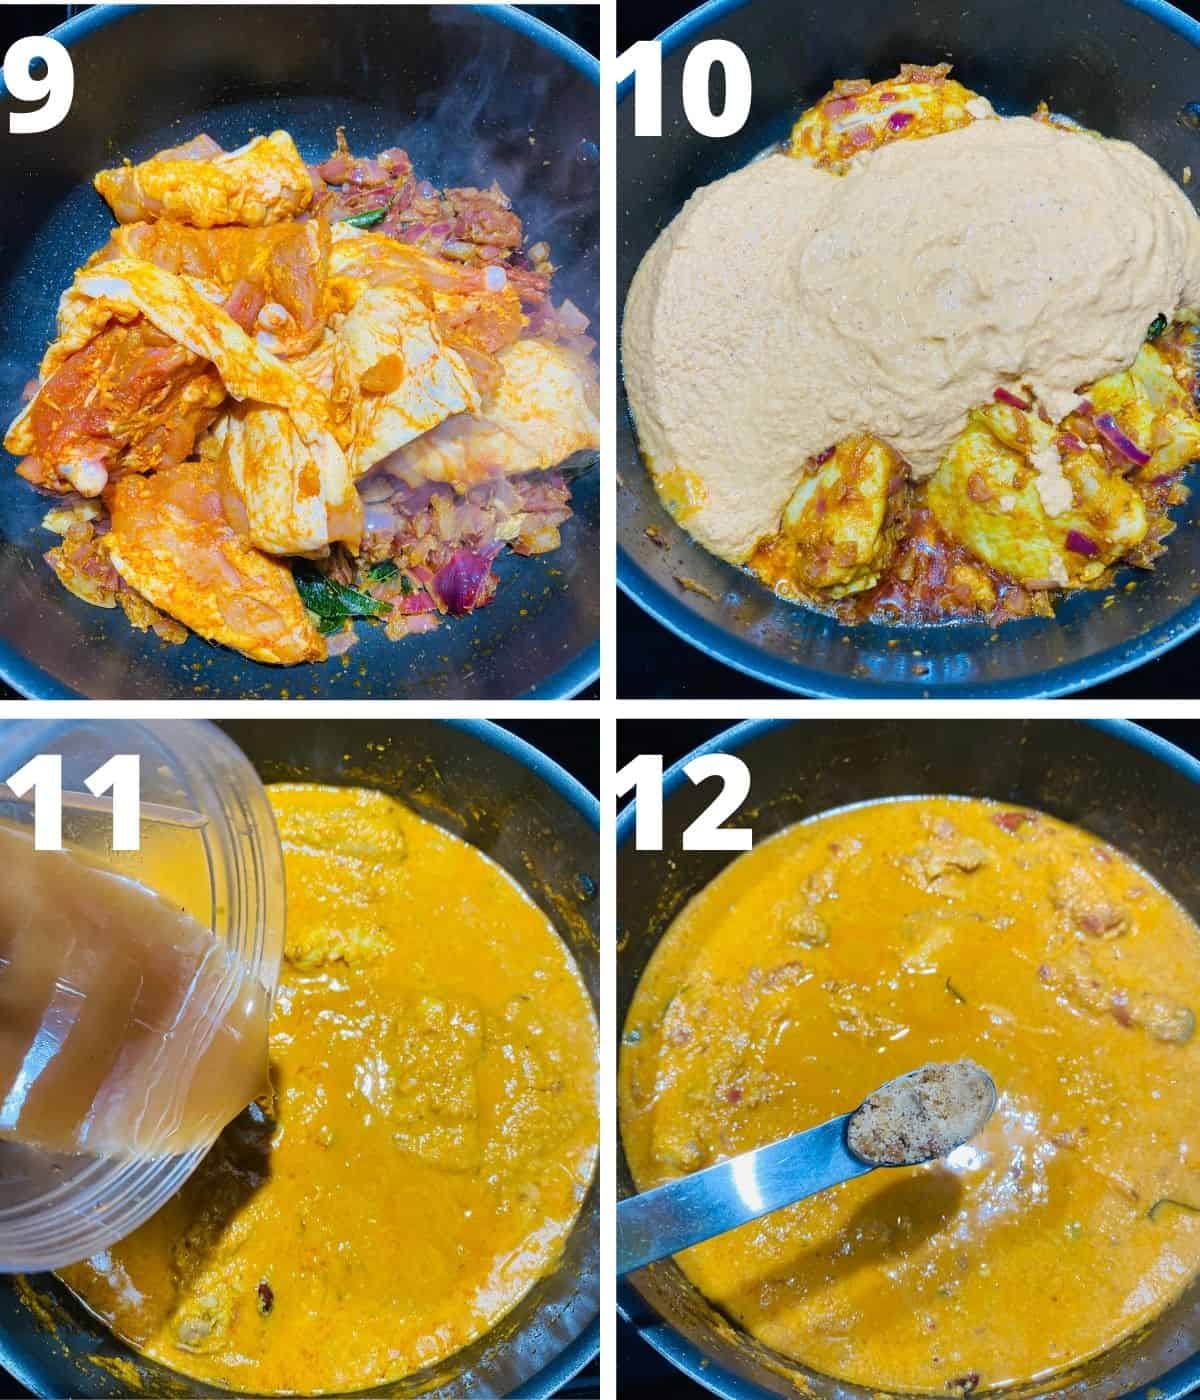 This is a collage image of step by step pics to show how to make chicken Salan. This collage shows from adding the chicken to the pan until the final step of adding the Jaggery.